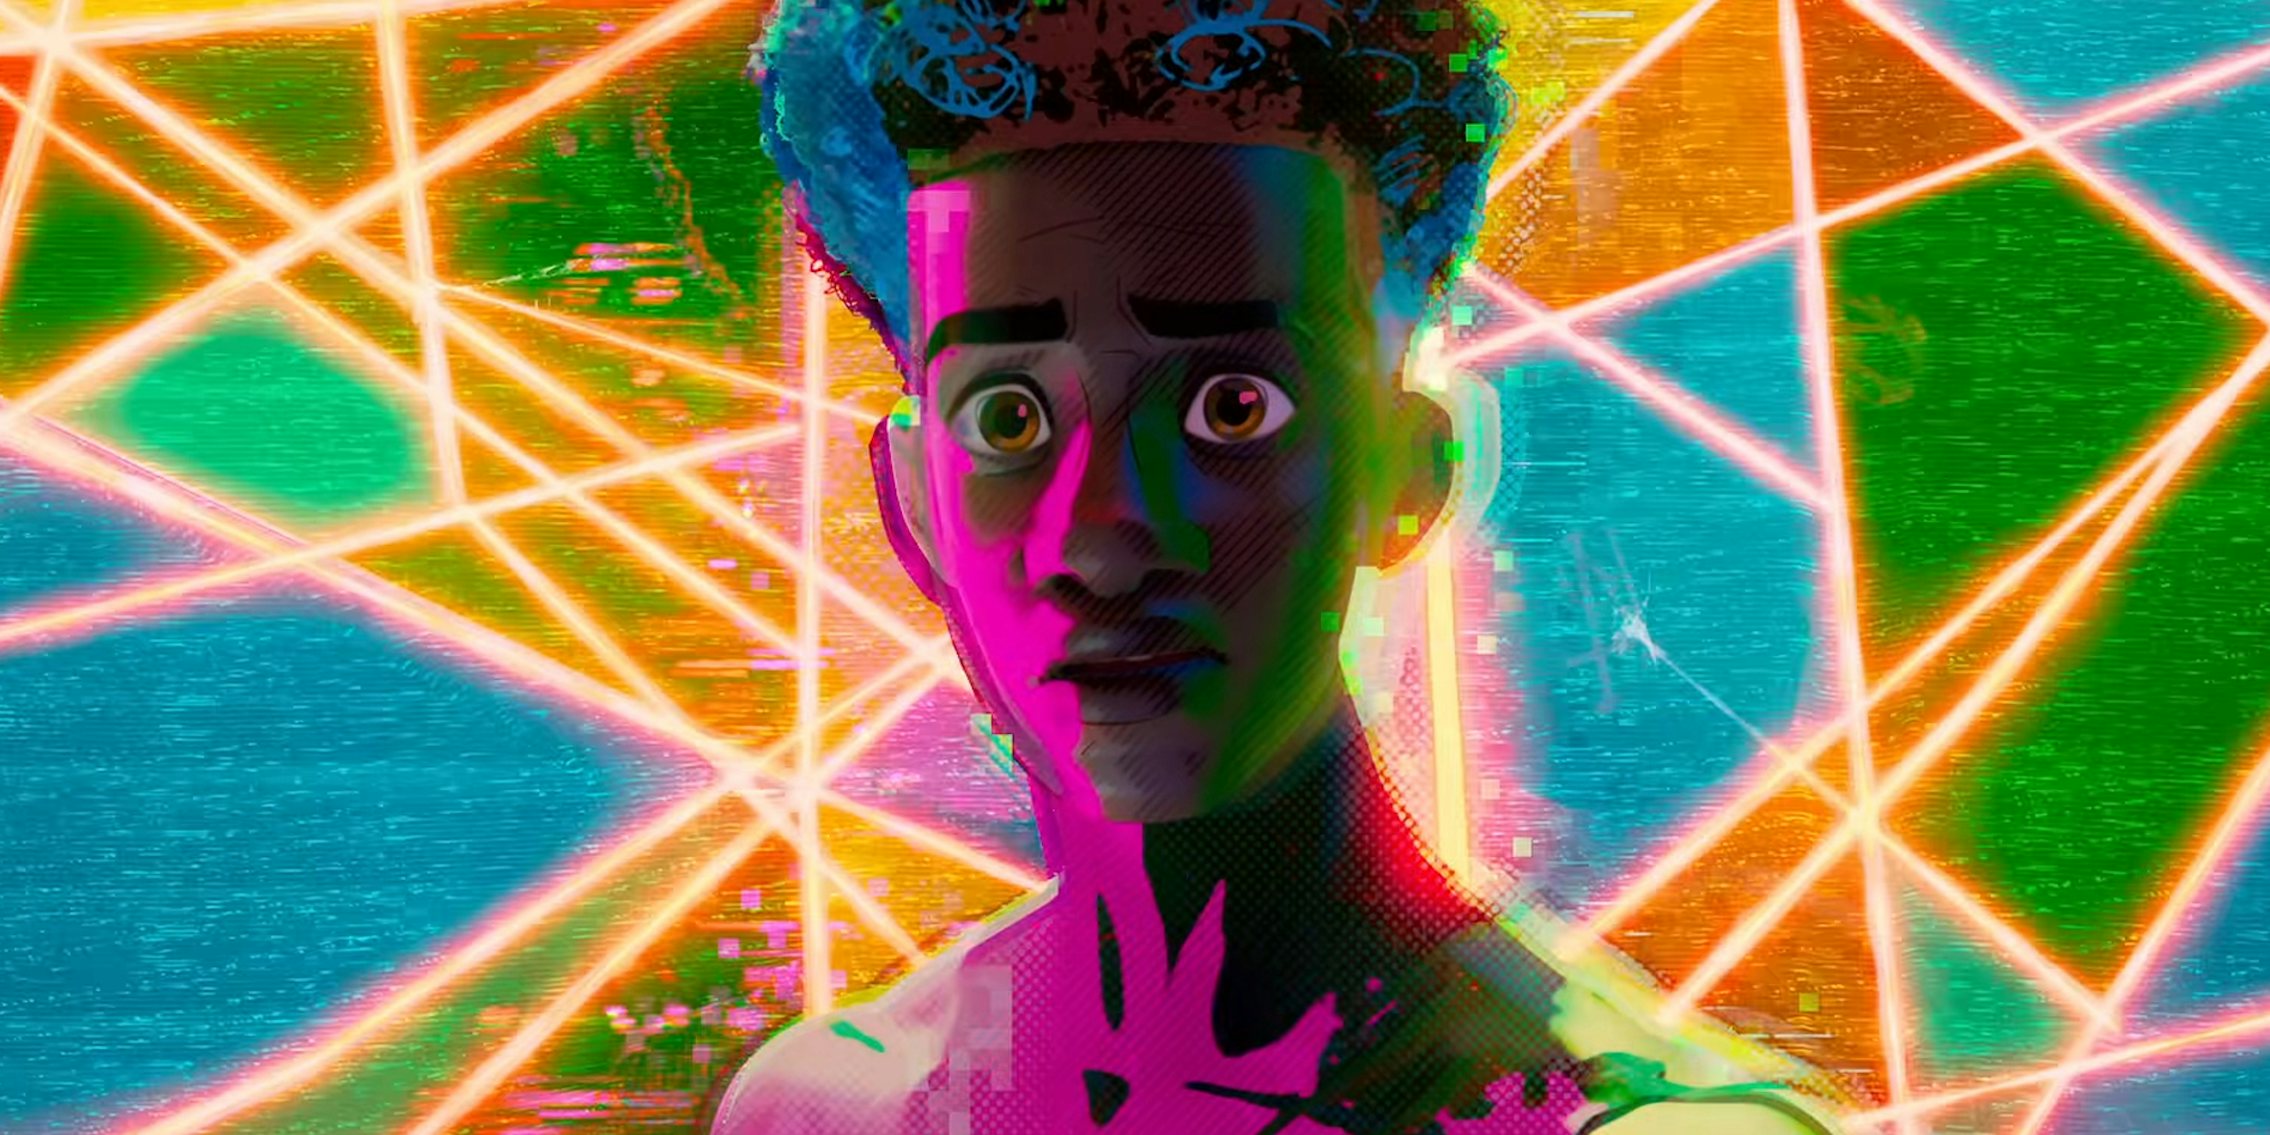 SPIDER-MAN: ACROSS THE SPIDER-VERSE - Official Trailer #2 Miles Morales in front of colorful background